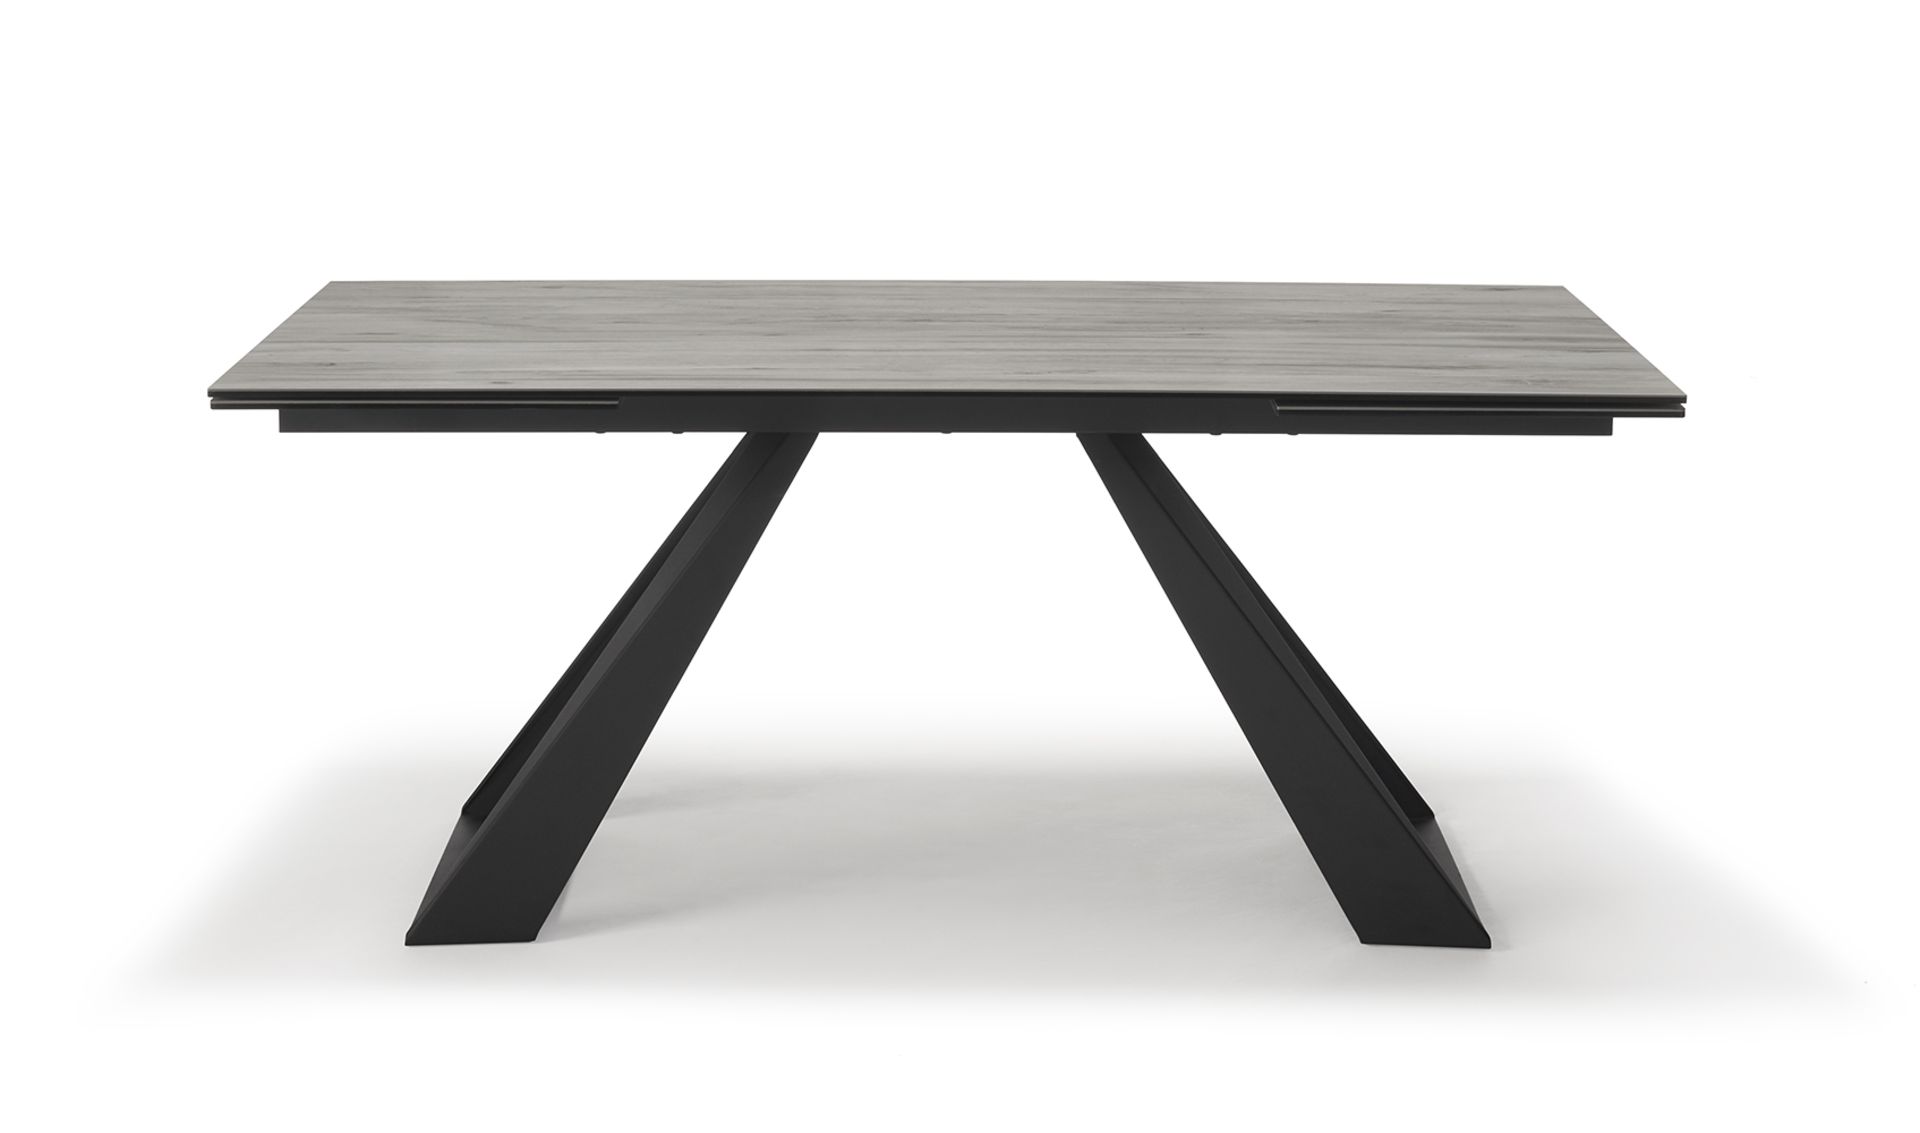 Spartan Dining Table by Kesterport The Spartan Dining Table is part of a sophisticated collection of - Bild 4 aus 12